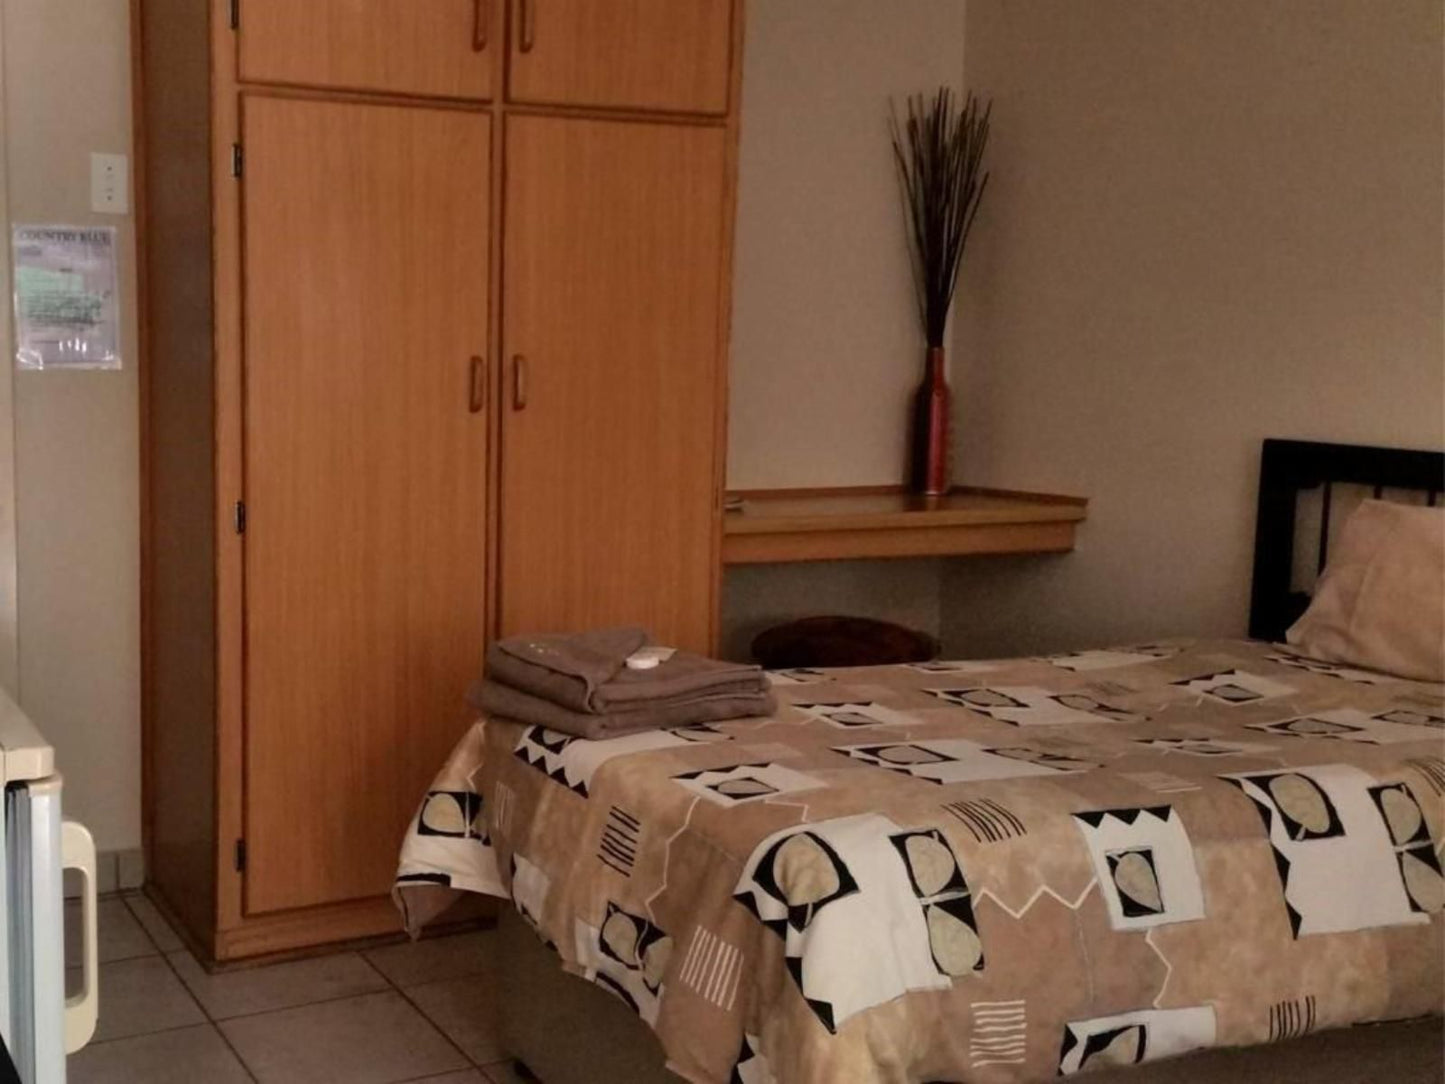 Country Blue Luxury Guest House Polokwane Ext 4 Polokwane Pietersburg Limpopo Province South Africa Sepia Tones, Bedroom